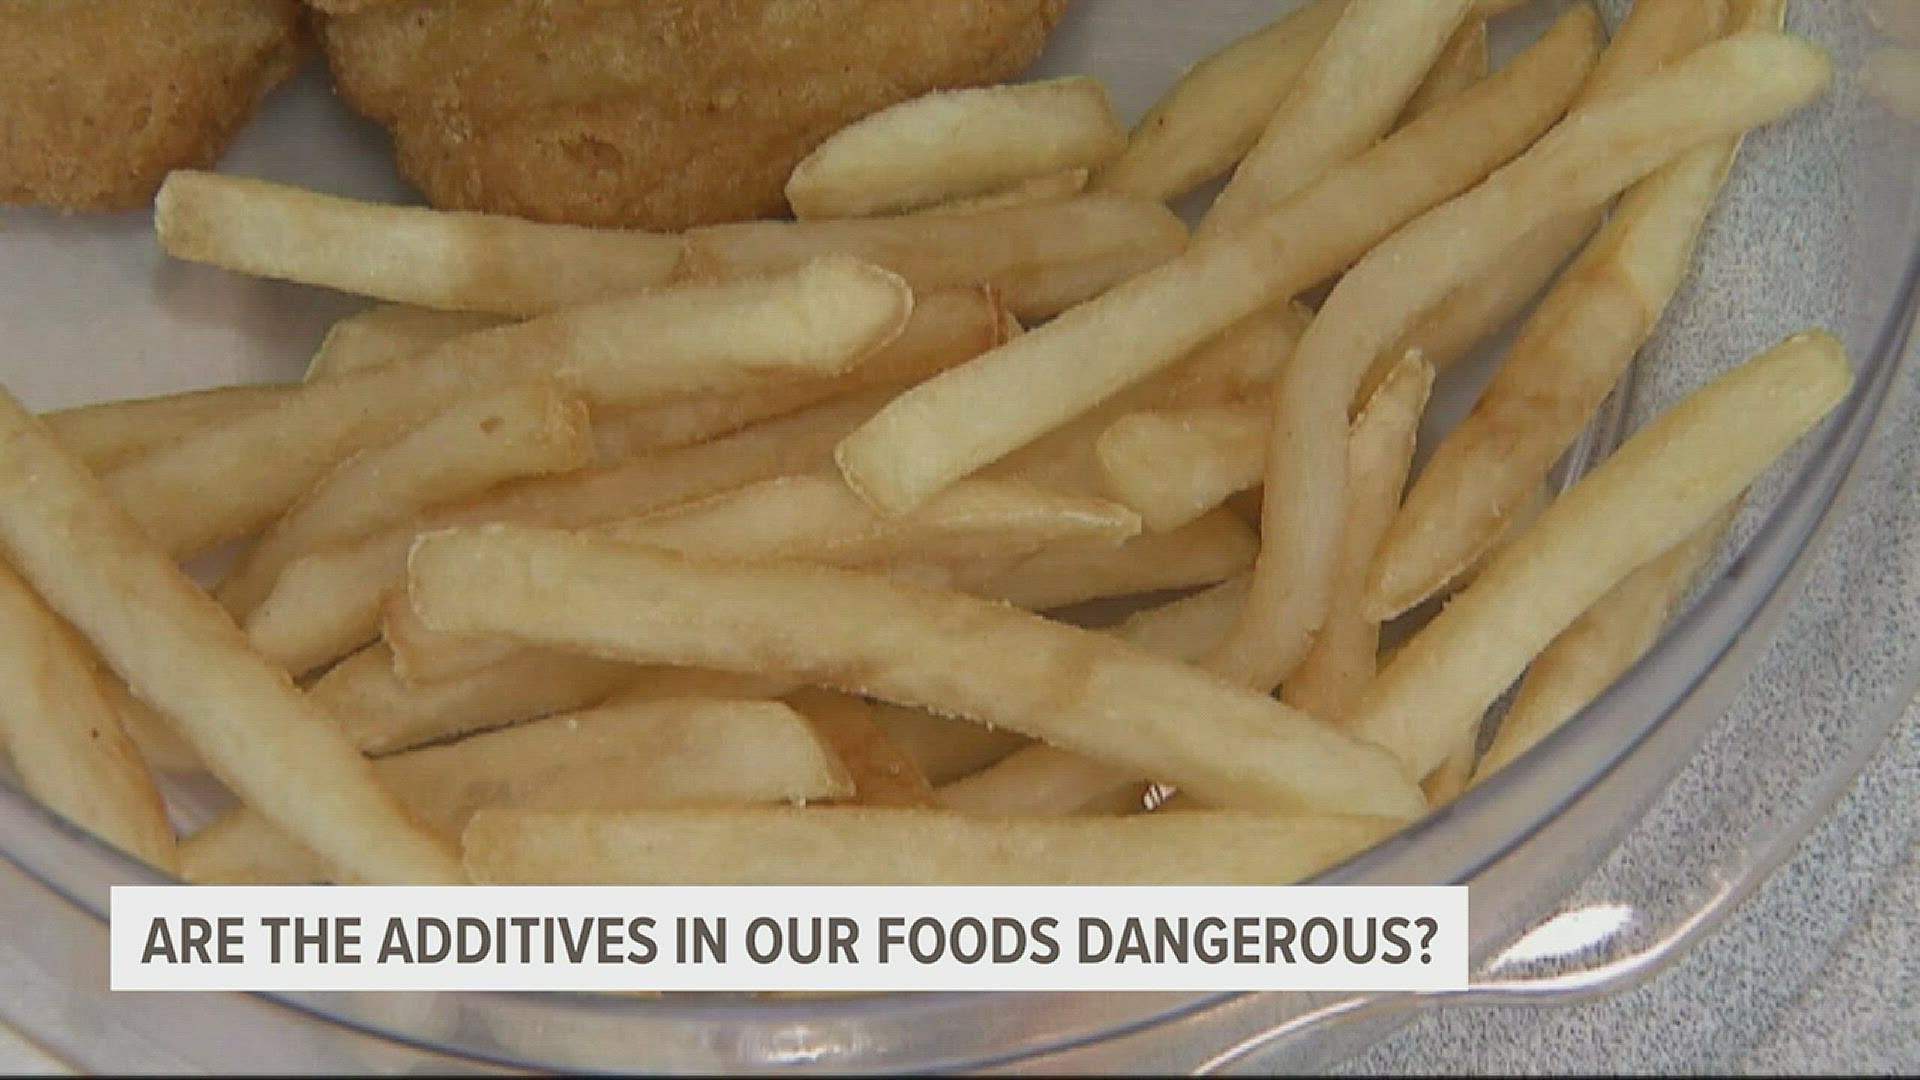 Some health experts say many additives in processed foods that the FDA considers safe haven't been reviewed in years.